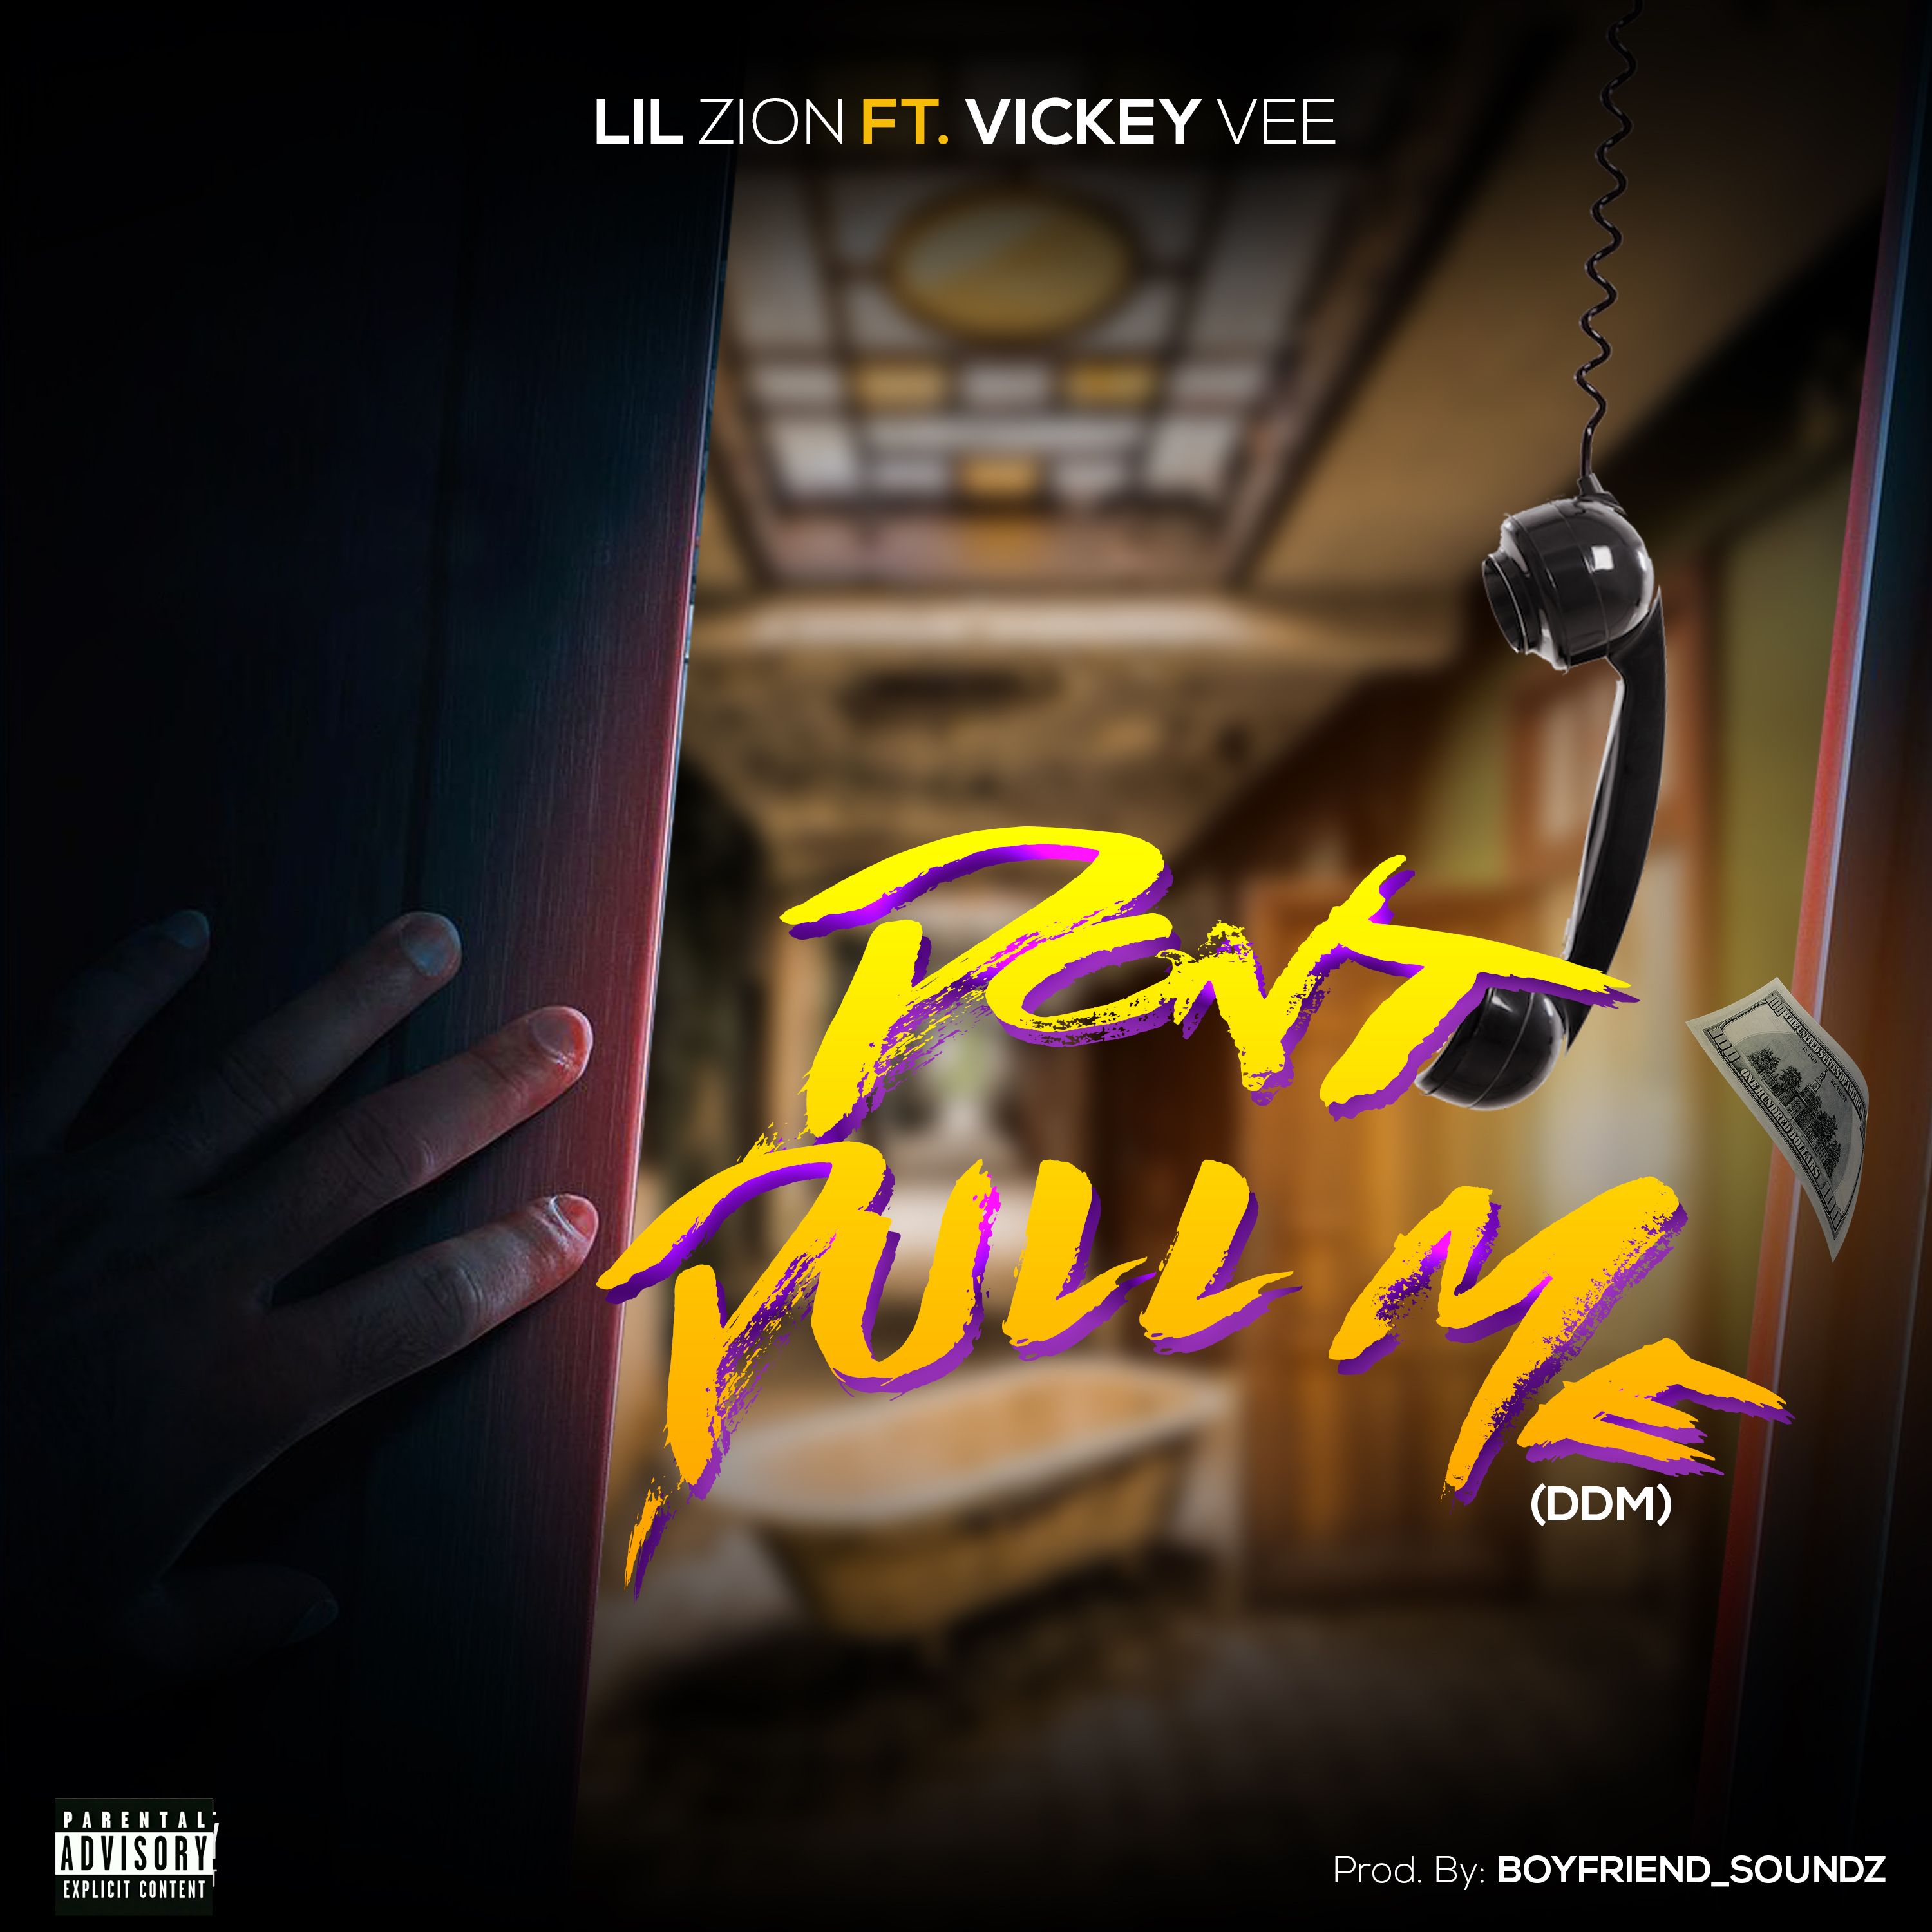 Zion - (DDM) Dont Dull Me Ft. Vickey Vee